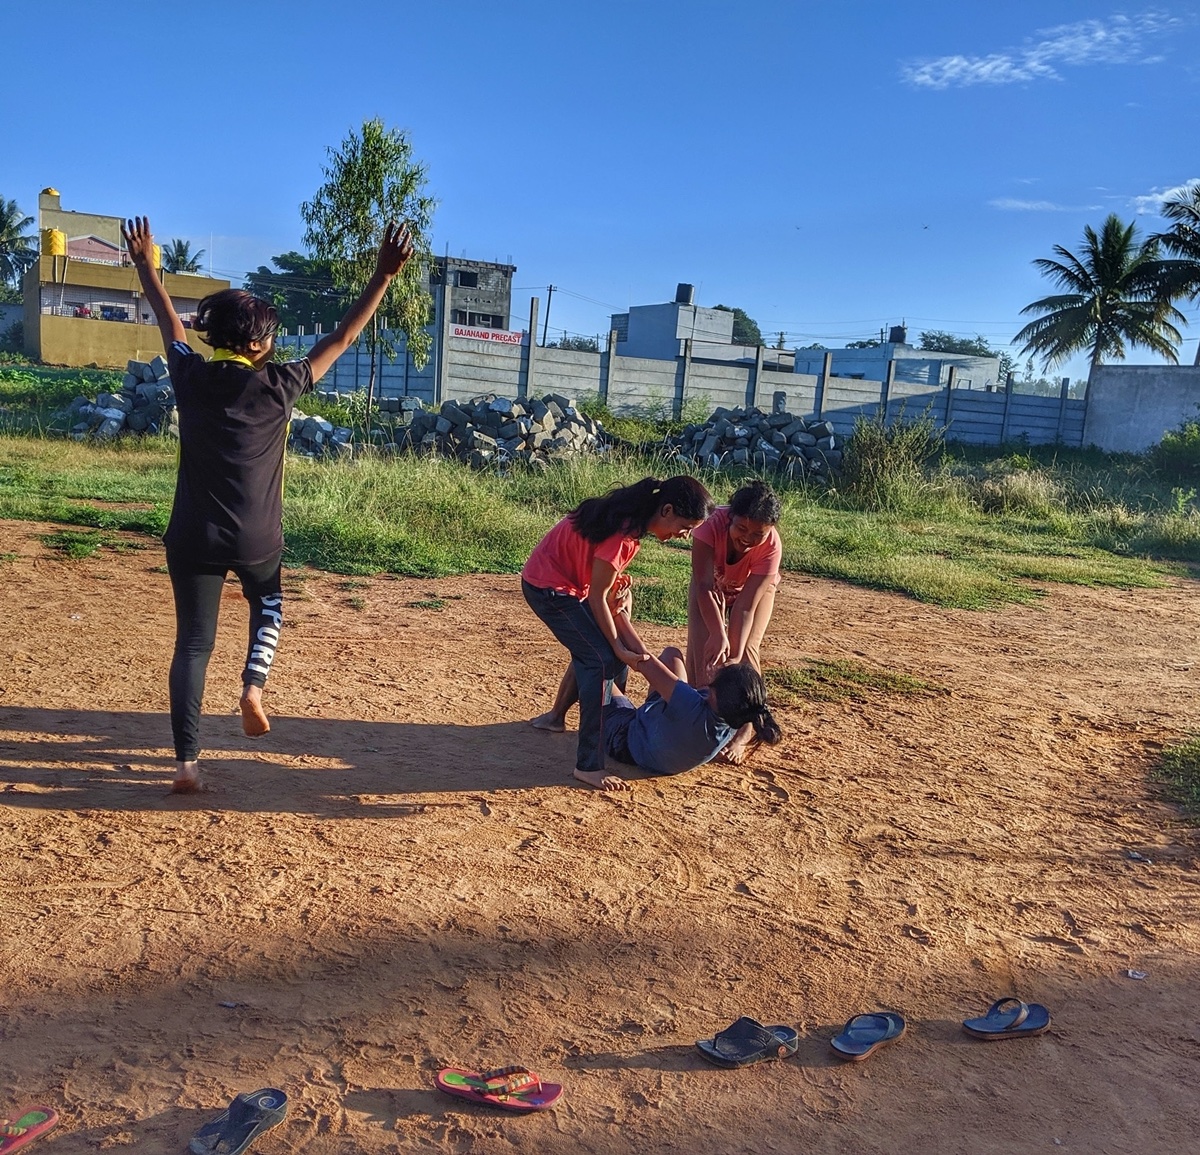 Women At Leisure: Girls playing Kabaddi early in the morning. Rinki jumps in joy as Kajal from the opposition team is taken down by her team members, Ravina and Neelam.